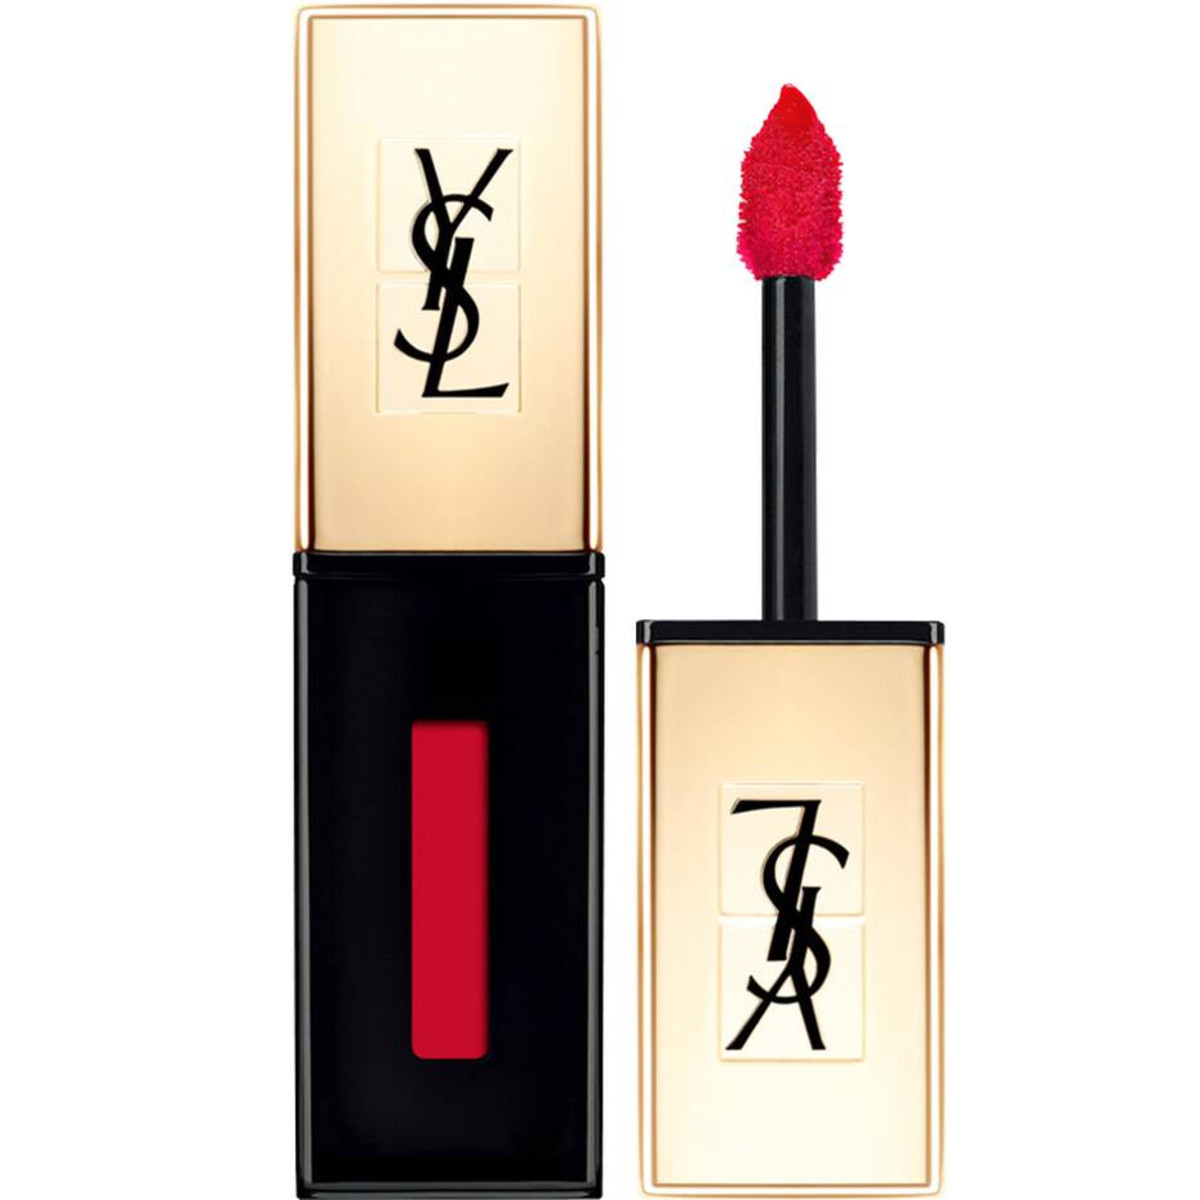 YSL Glossy Stain in #9 Rouge Laque ($49 $14.70 CAD at lorealbeautyoutlet.ca*)